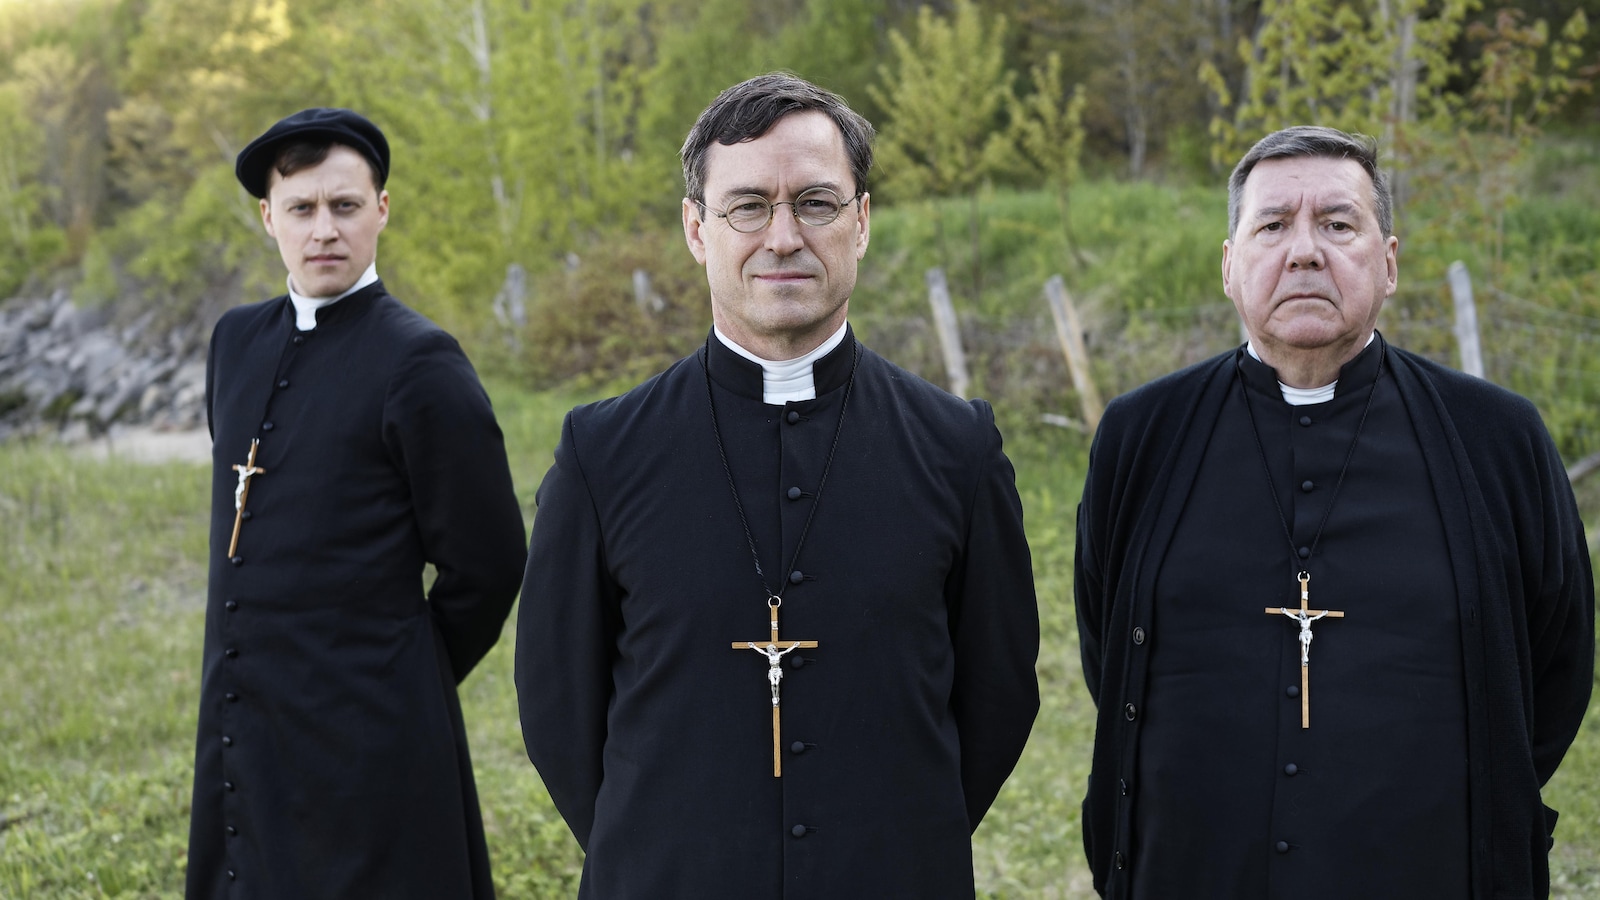 In a field, three men dressed as priests (including Sebastian Ricard and Remy Girard) look at the camera.